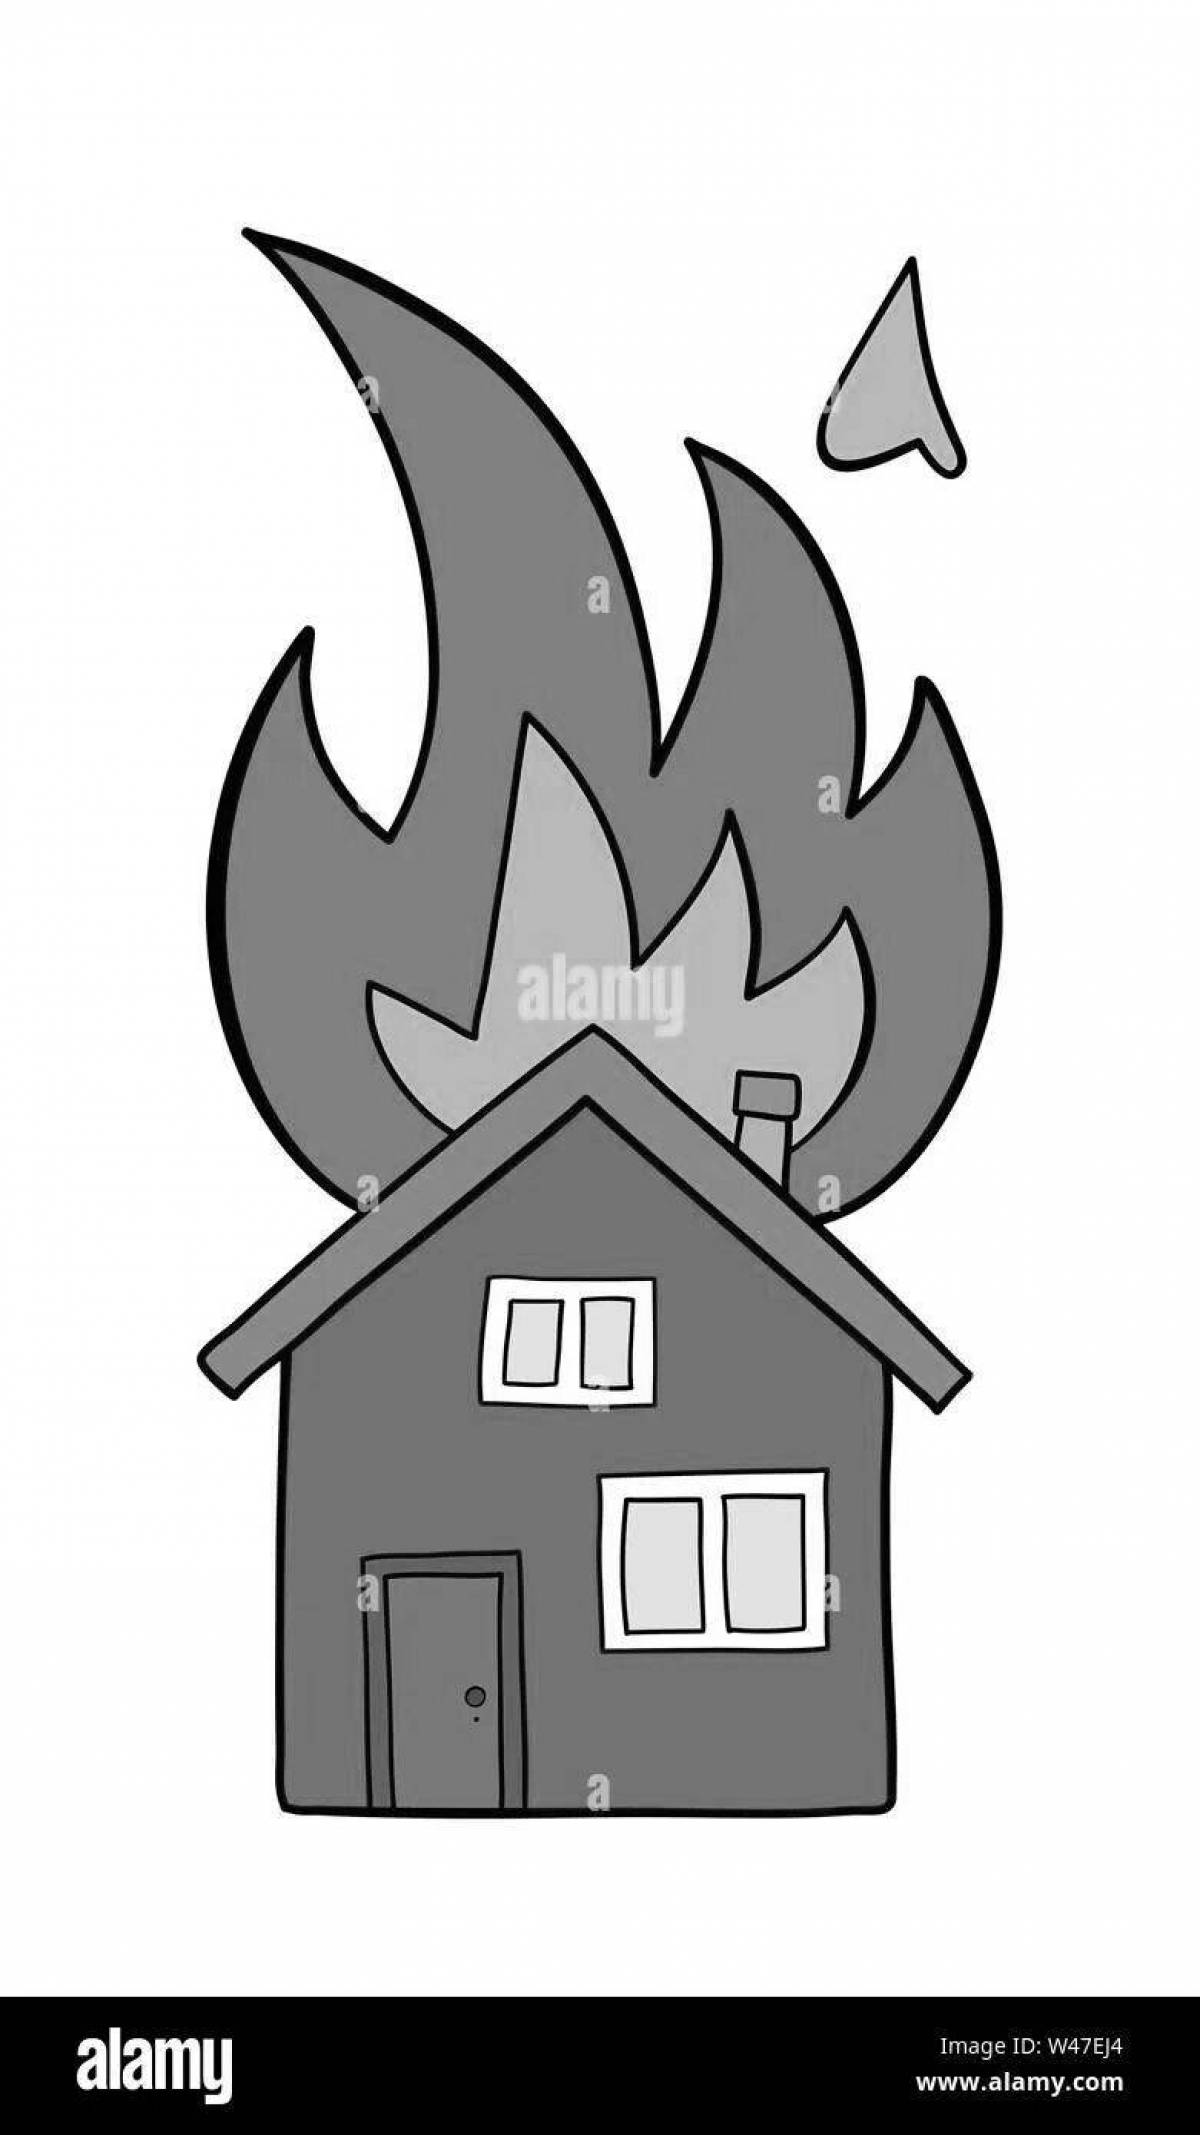 Intriguing burning house coloring book for kids